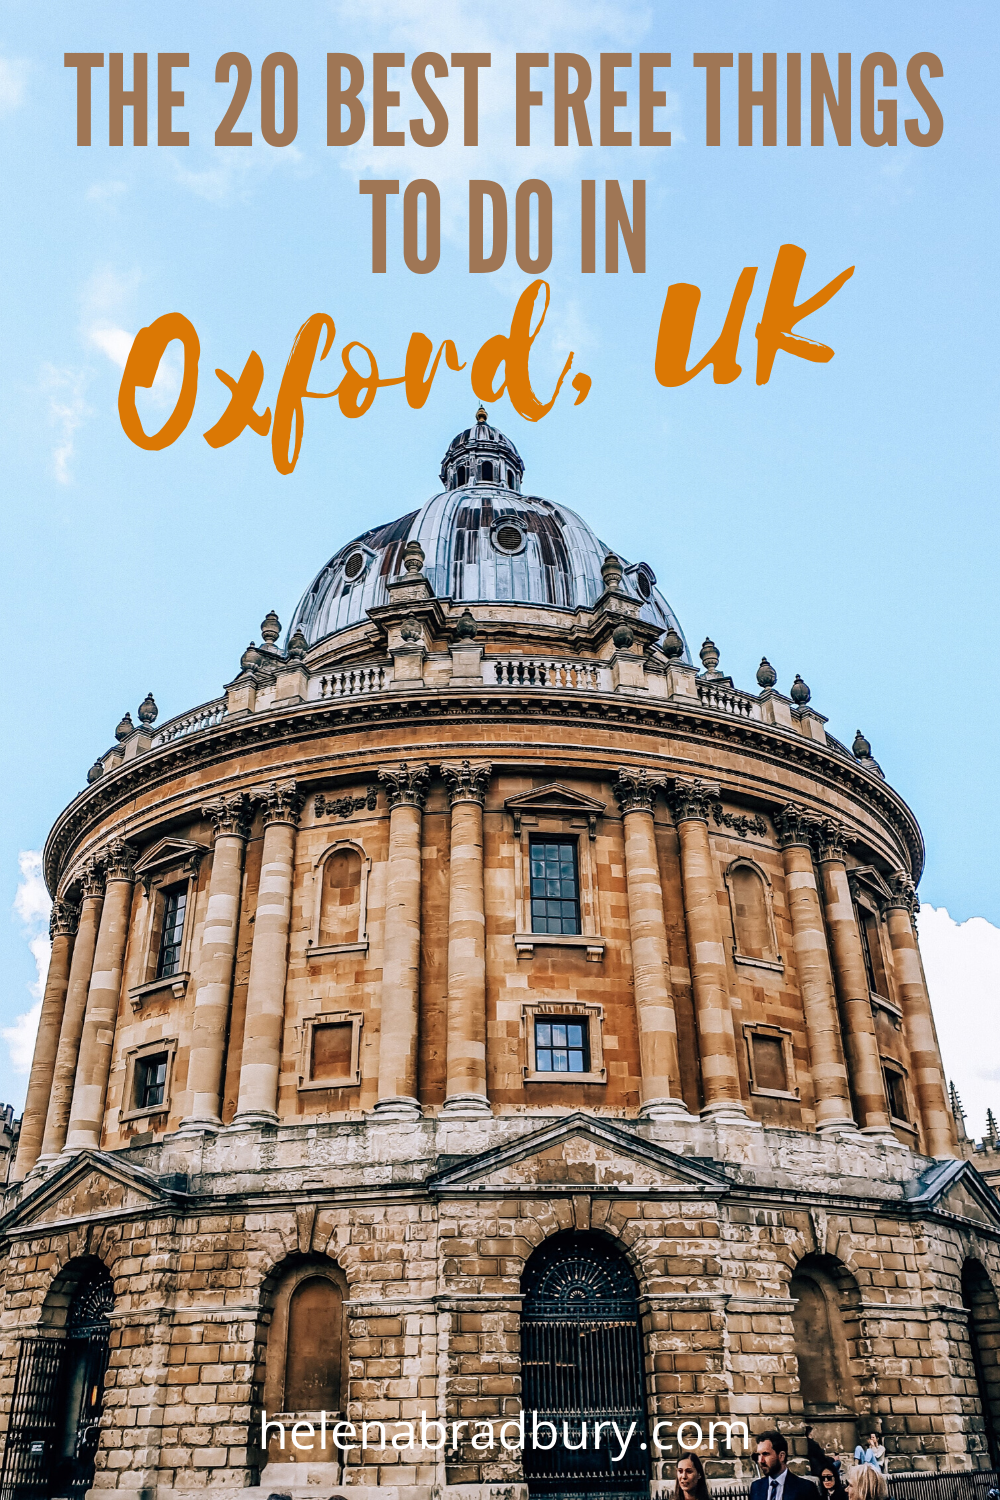 Oxford is a great city to visit for a weekend or even just a day trip. Whether you’re visiting or a local, this guide includes the 20 Best Free Things to do in Oxford for any time of year  | Helena Bradbury Travel Blog | Oxford what to do | Museums …